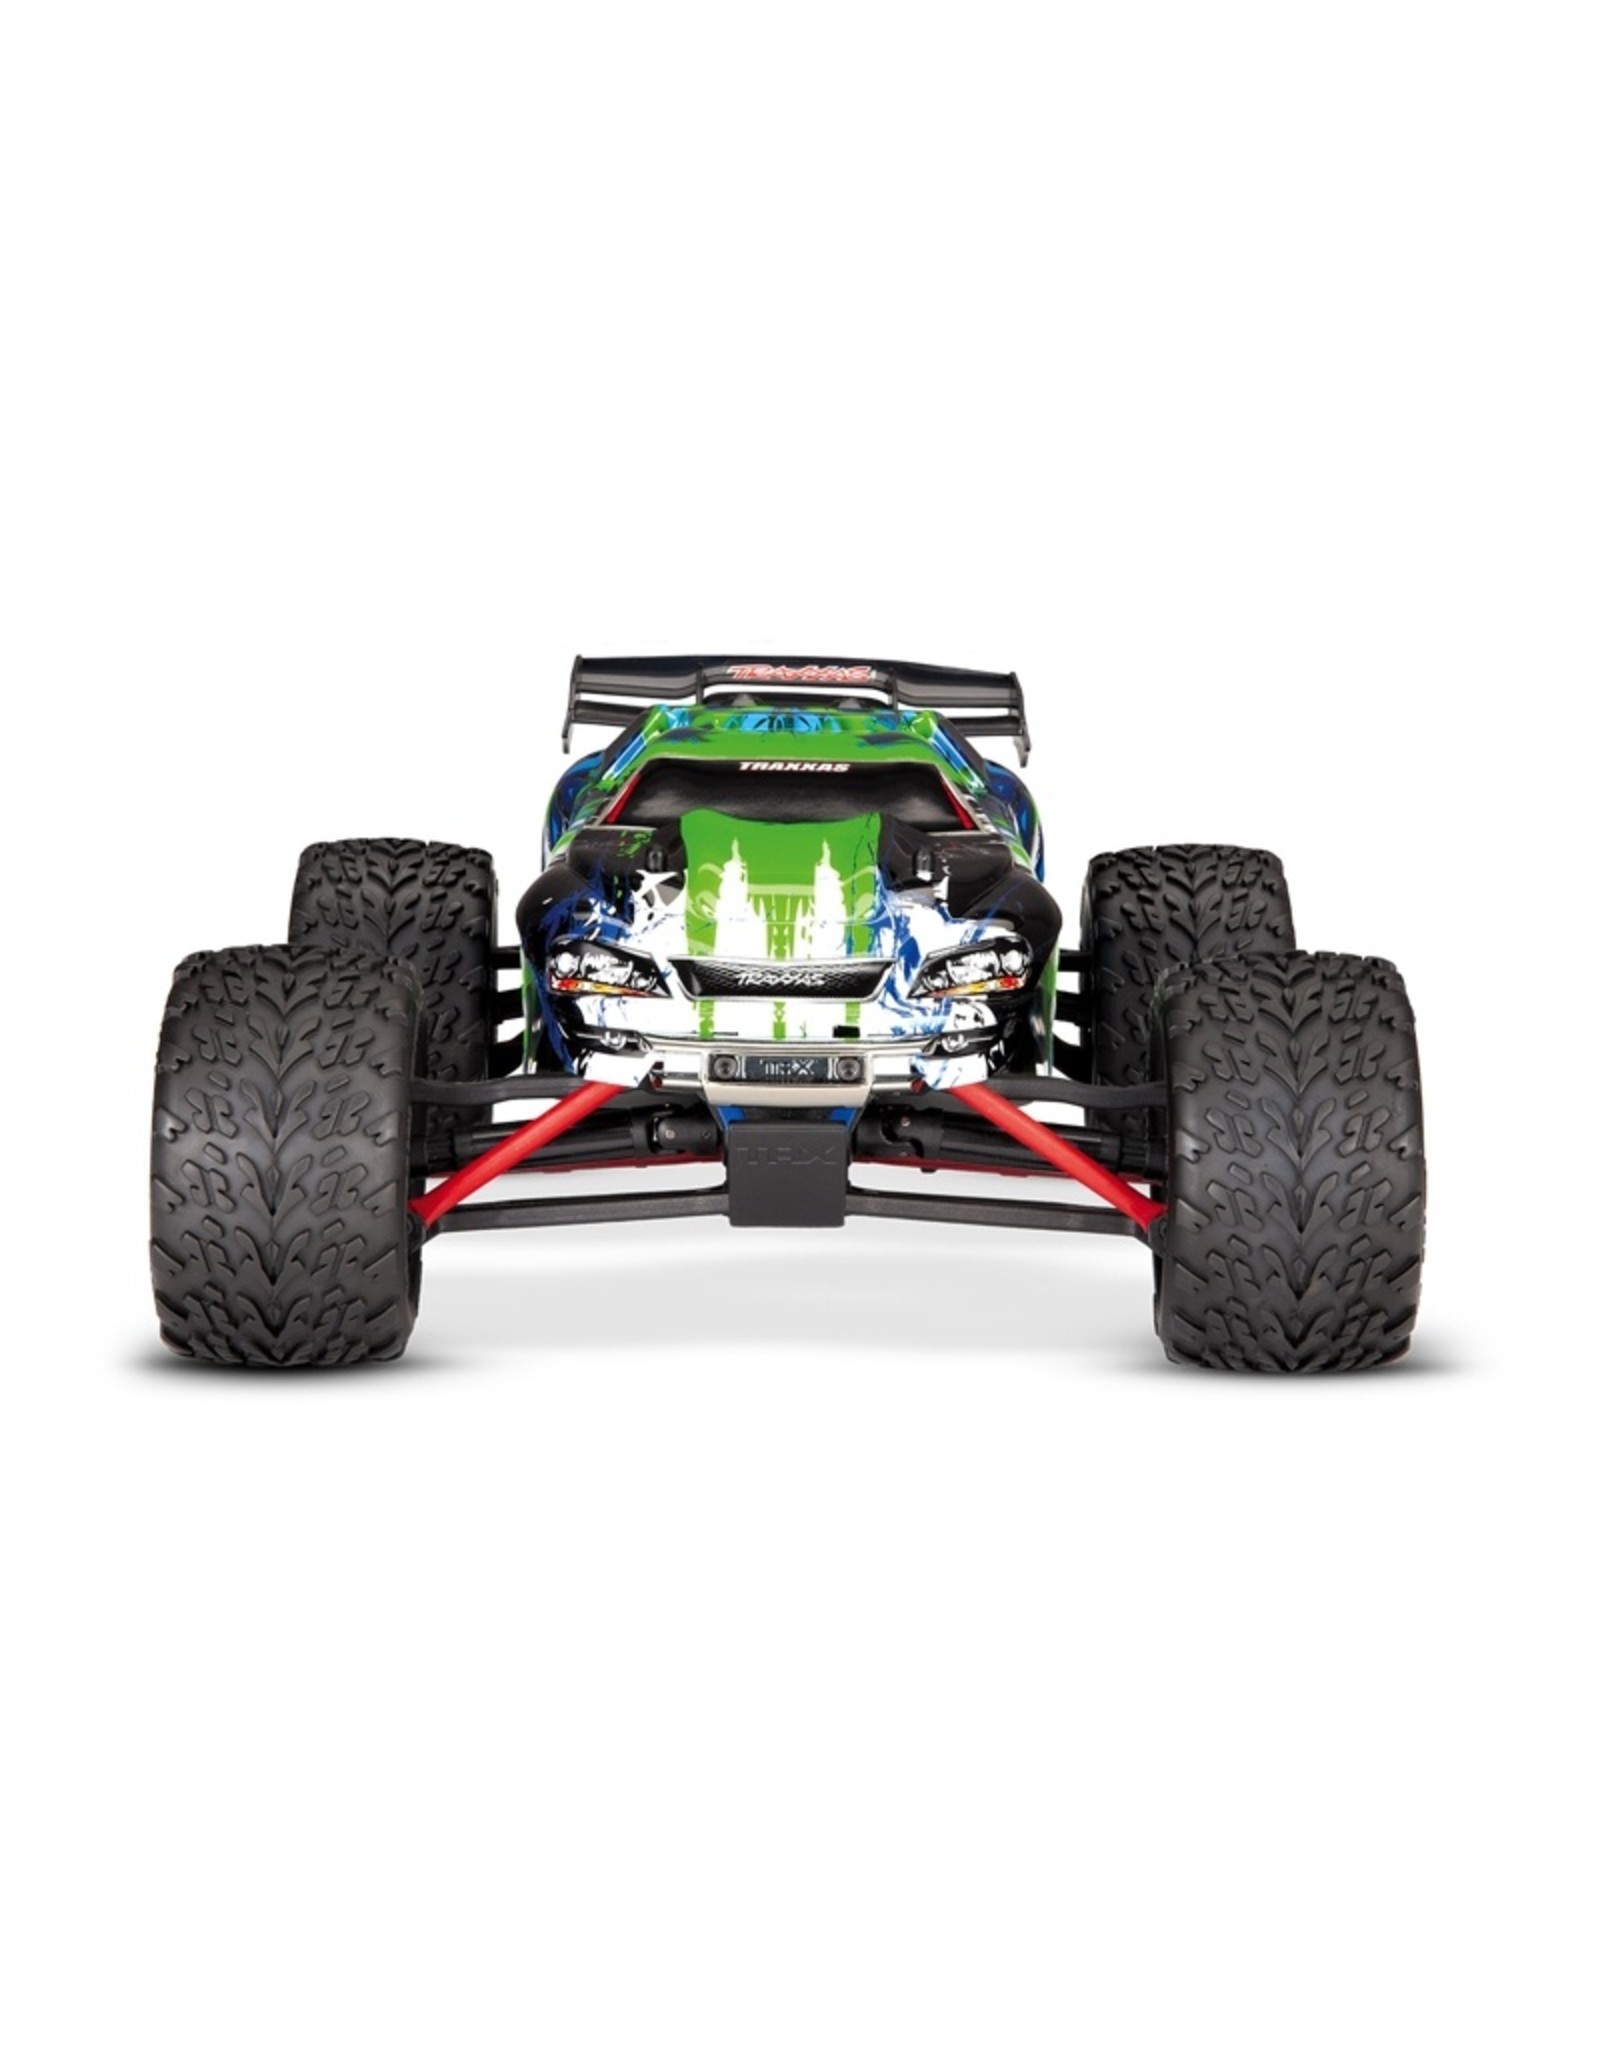 Traxxas TRA71054-1 Green E-Revo : 1/16-Scale 4WD Racing Monster Truck with TQ 2.4GHz